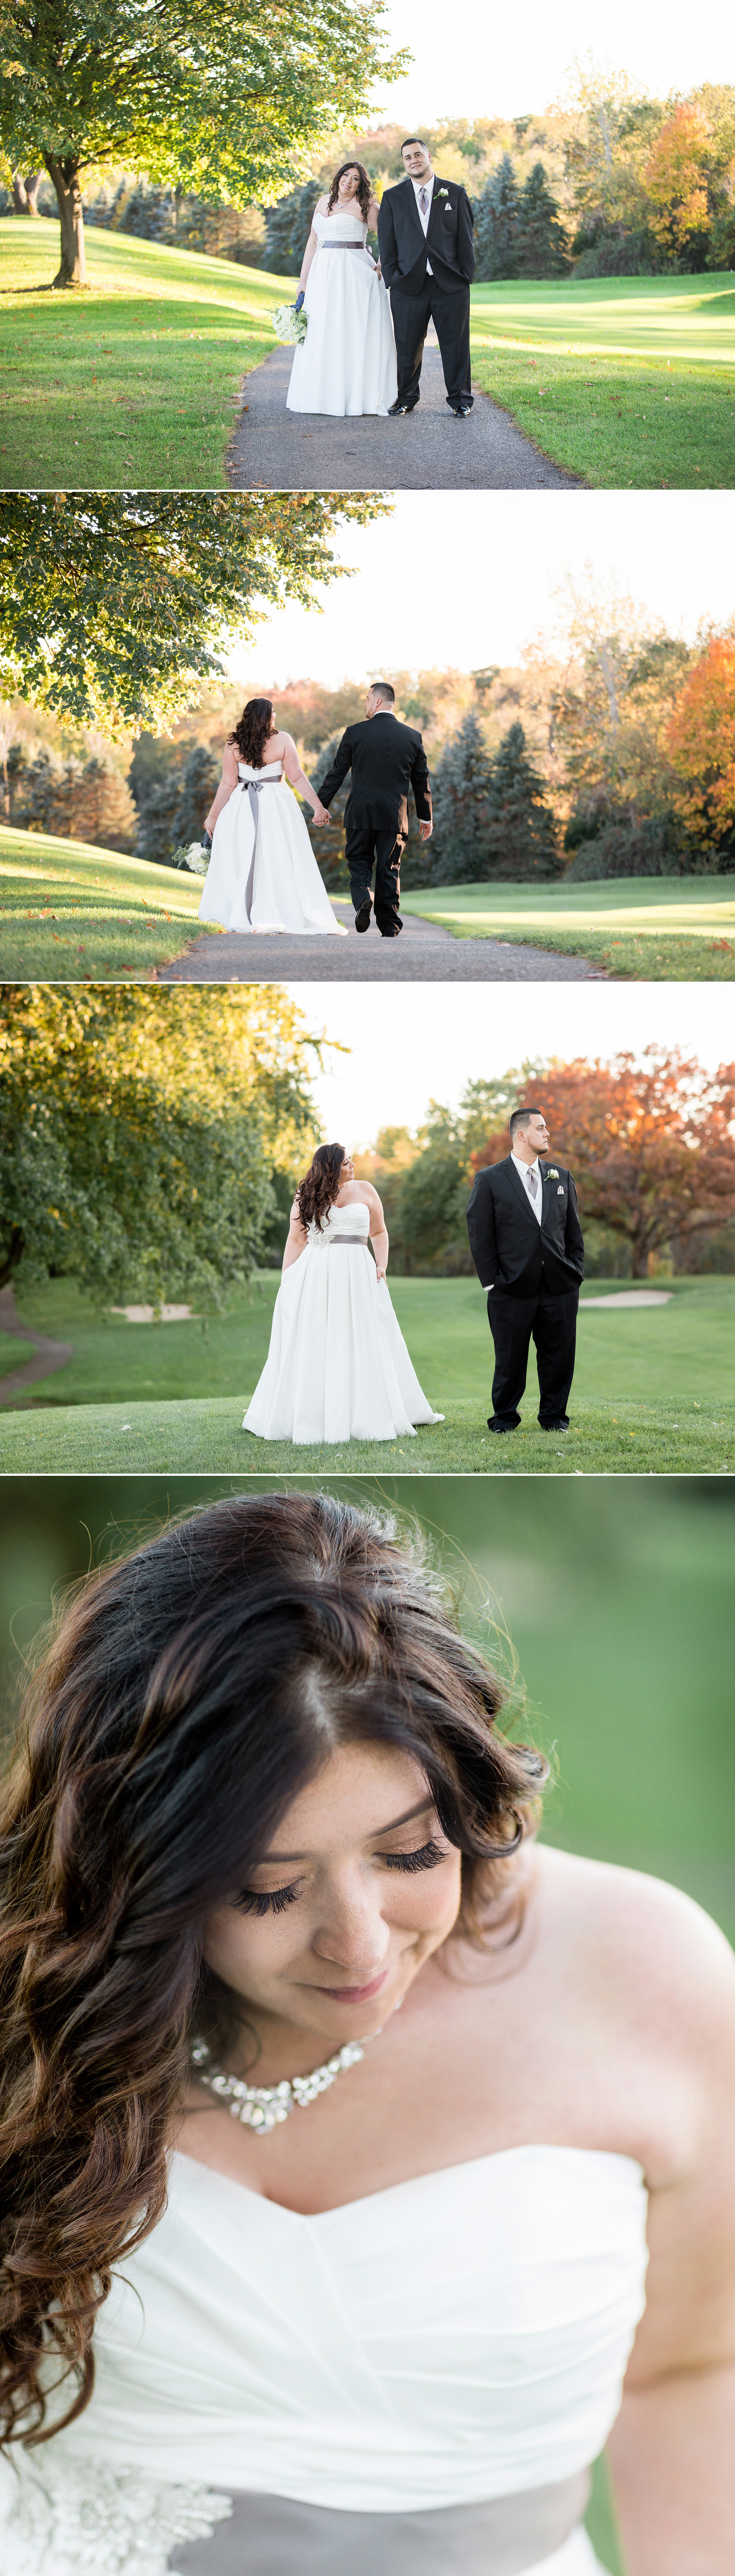 Bride and groom photos collage from a Paint Creek Country Club Wedding